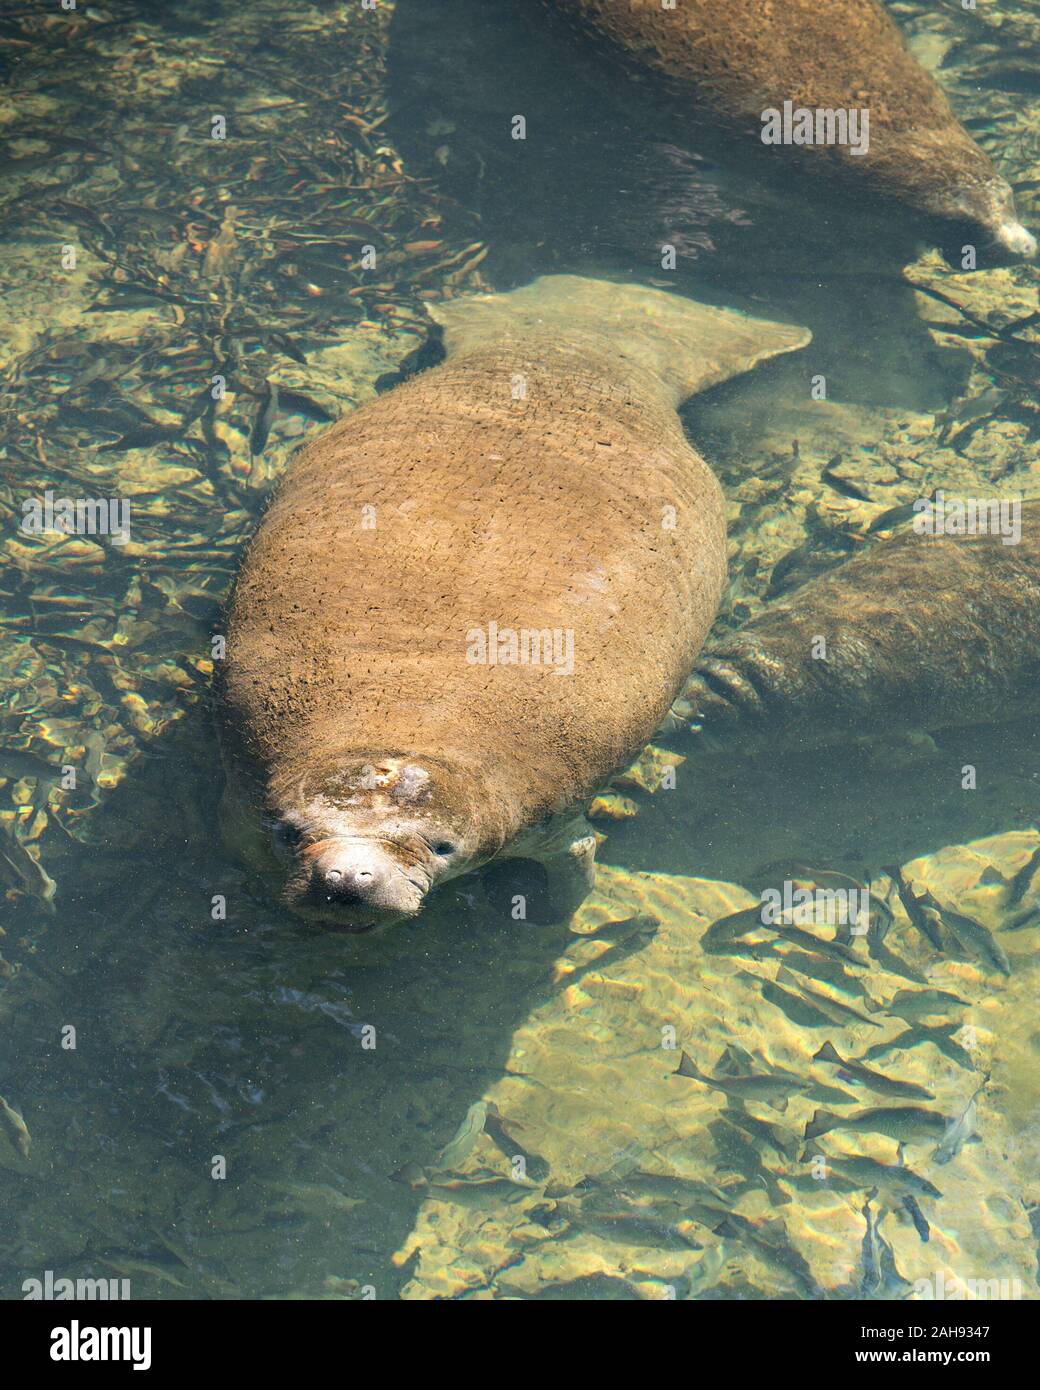 Manatee marine mammal displaying its nostril, eyes, paddle, flippers, surrounded by fish in the warm outflow of water from Florida river. Stock Photo